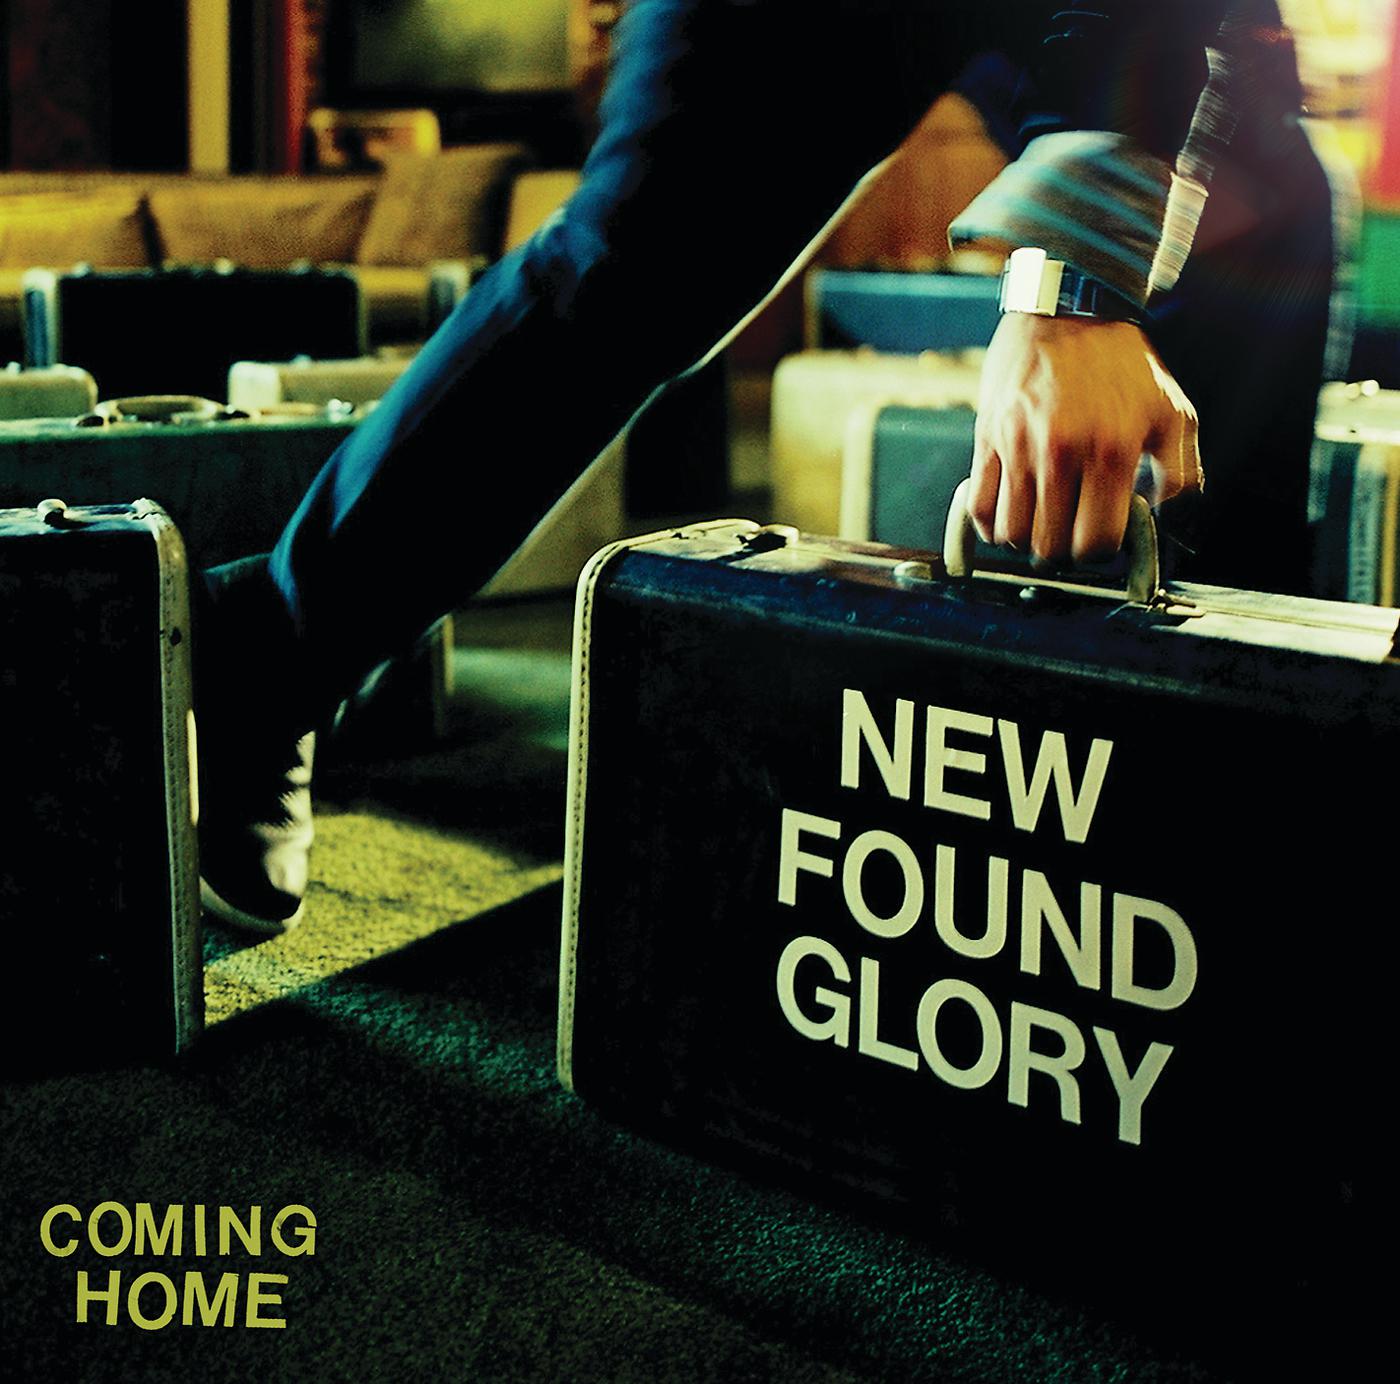 Find a new home. New found Glory. New found Glory album. Coming Home. New found Glory винил.